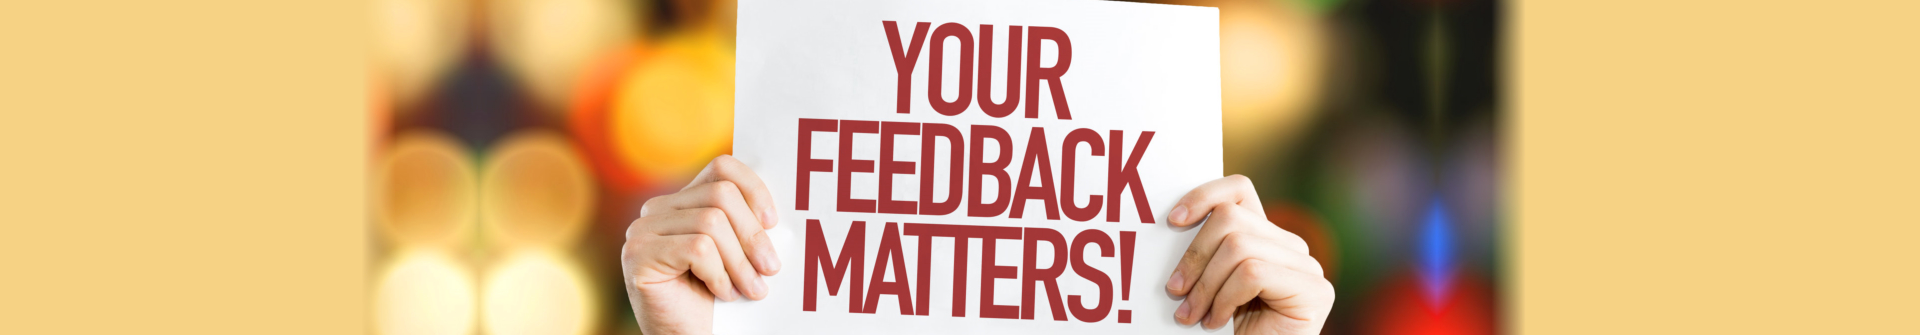 Your Feedback Matters placard